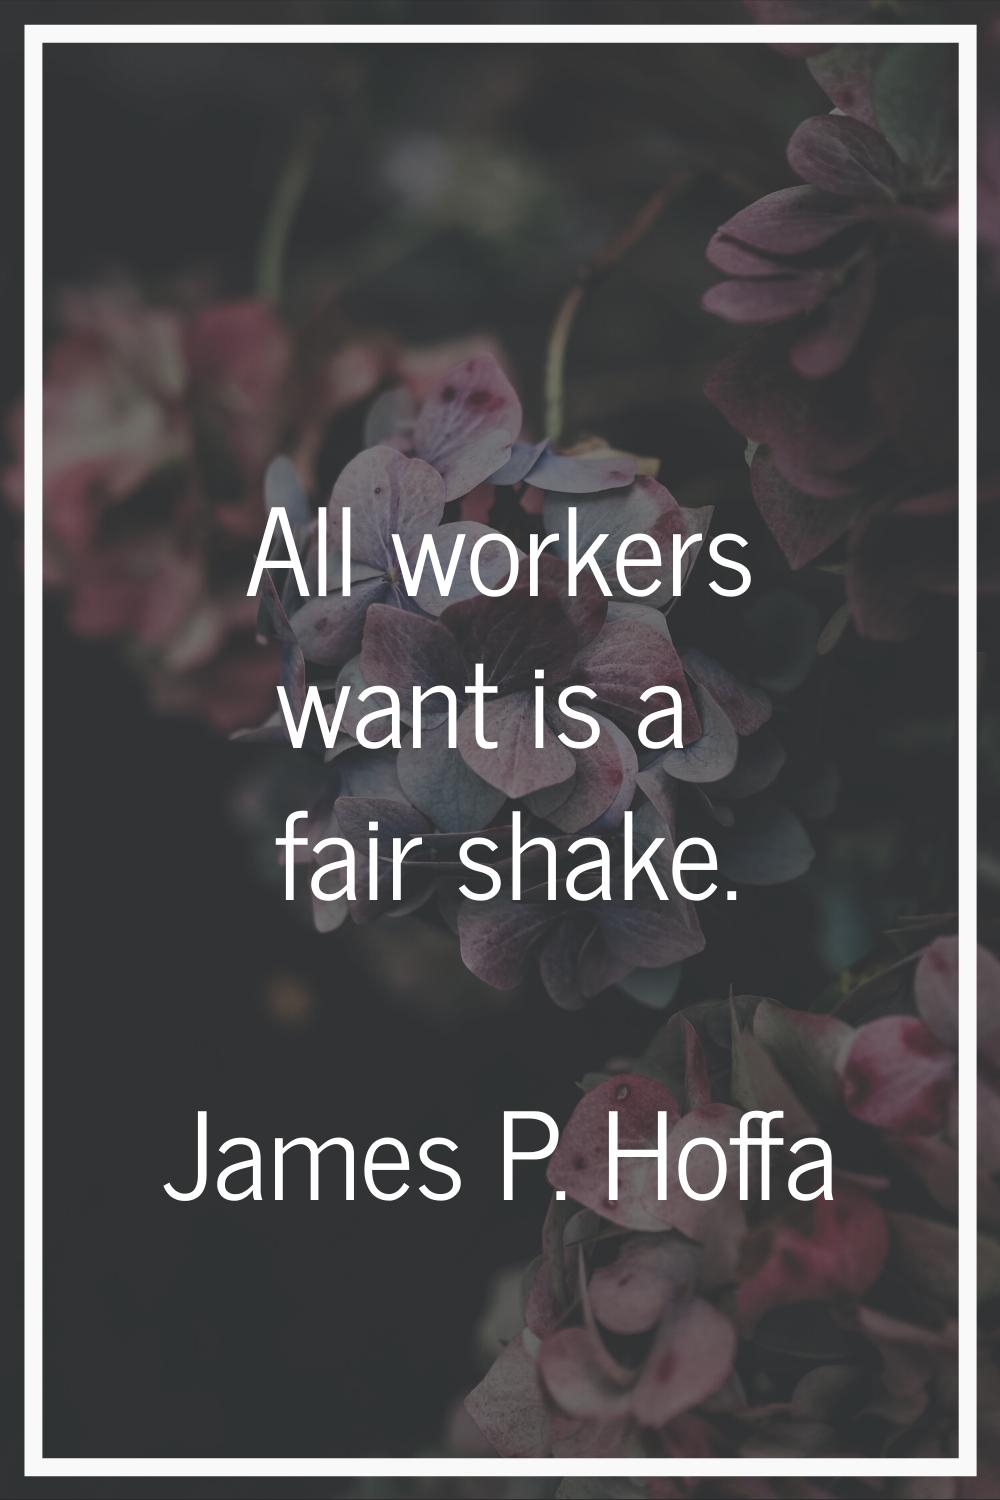 All workers want is a fair shake.